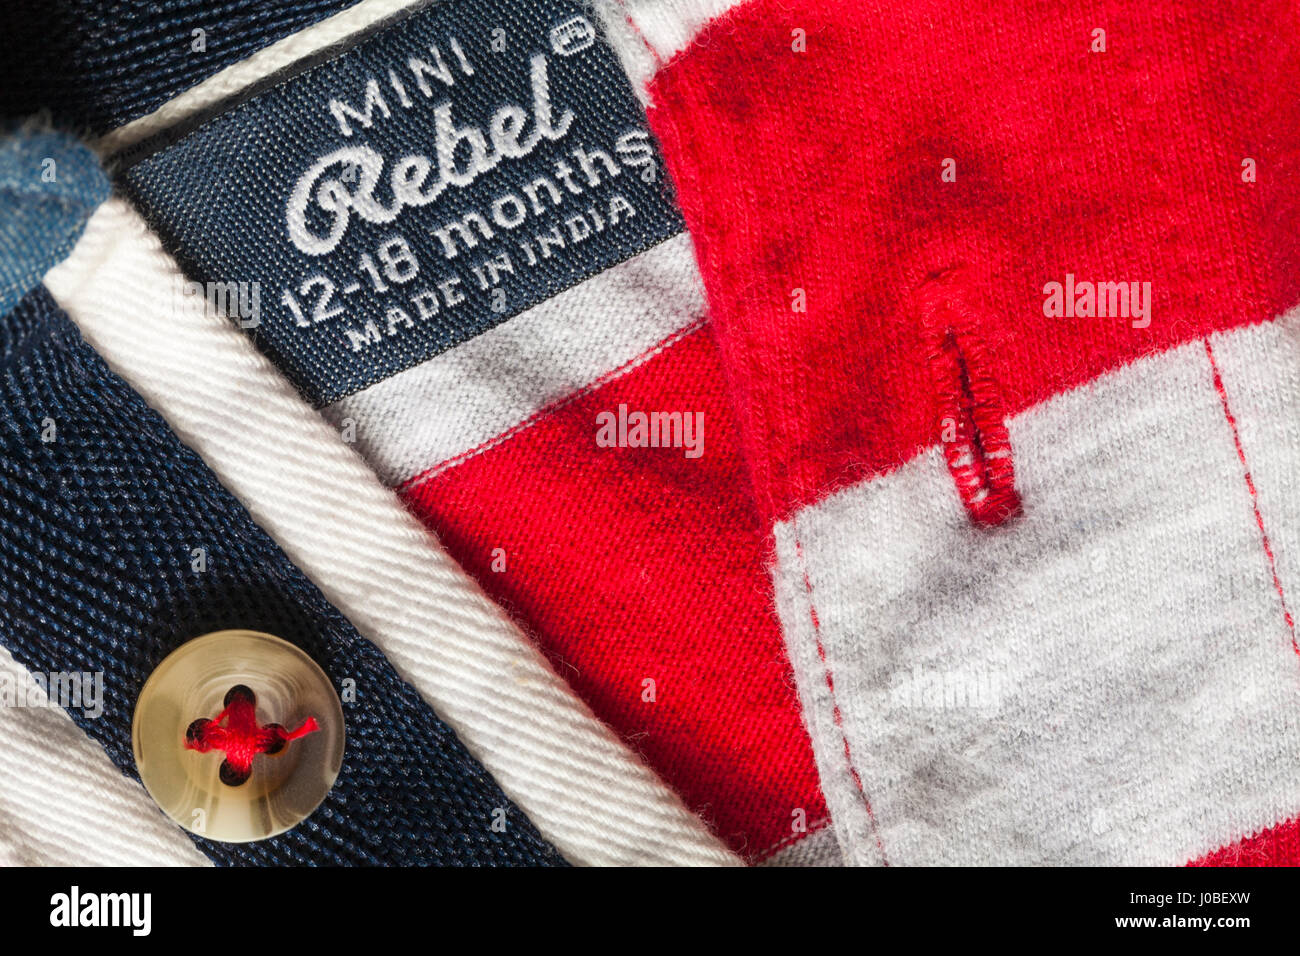 Mini Rebel label in clothing Made in India for ages 12-18 months - sold in the UK United Kingdom, Great Britain Stock Photo